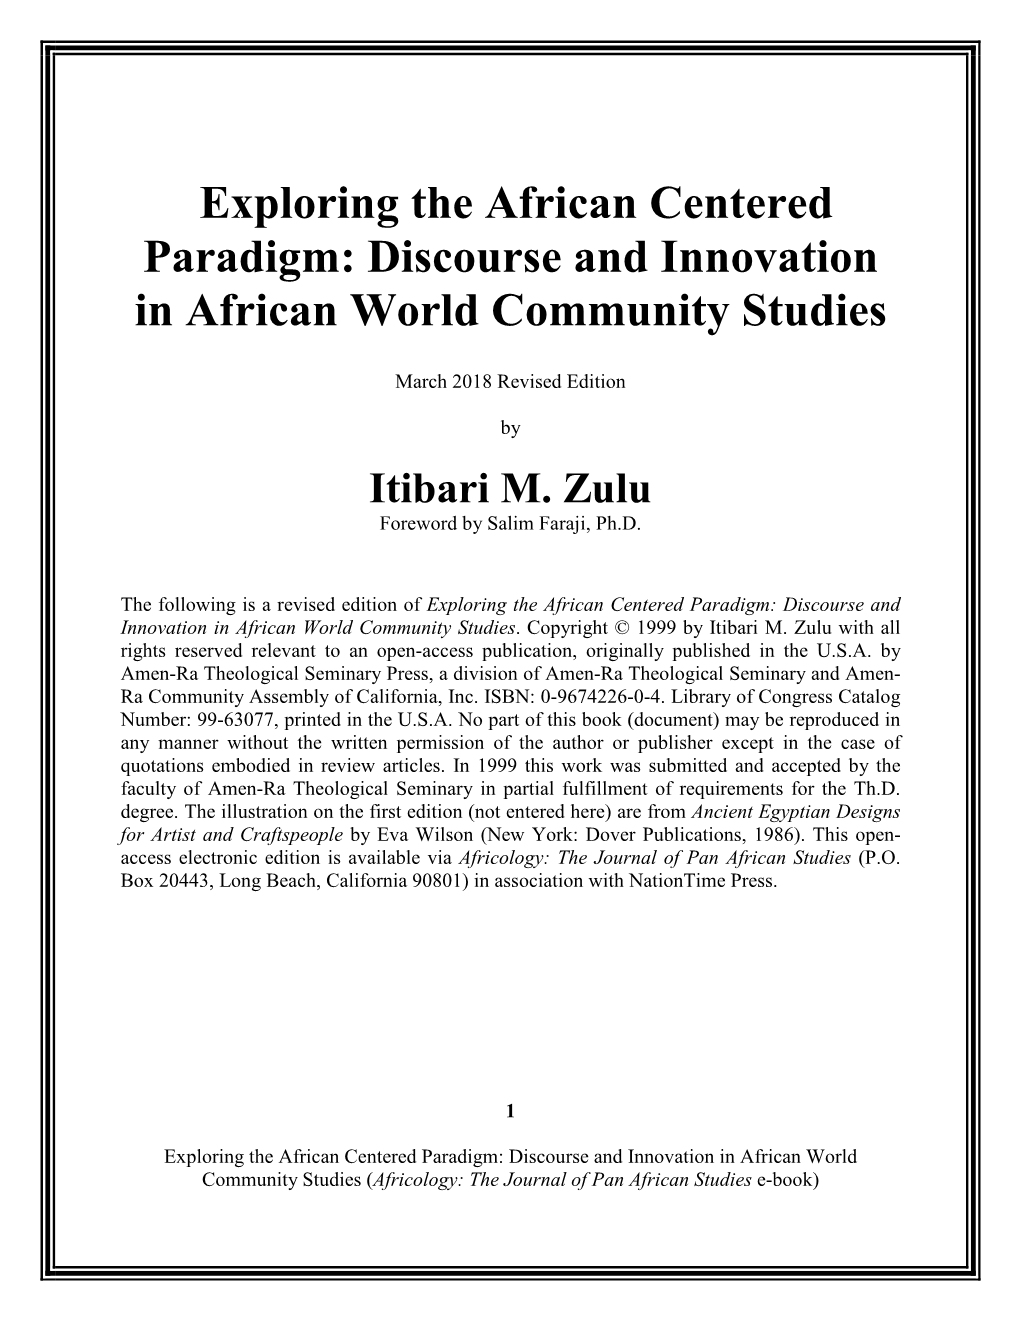 Exploring the African Centered Paradigm: Discourse and Innovation in African World Community Studies